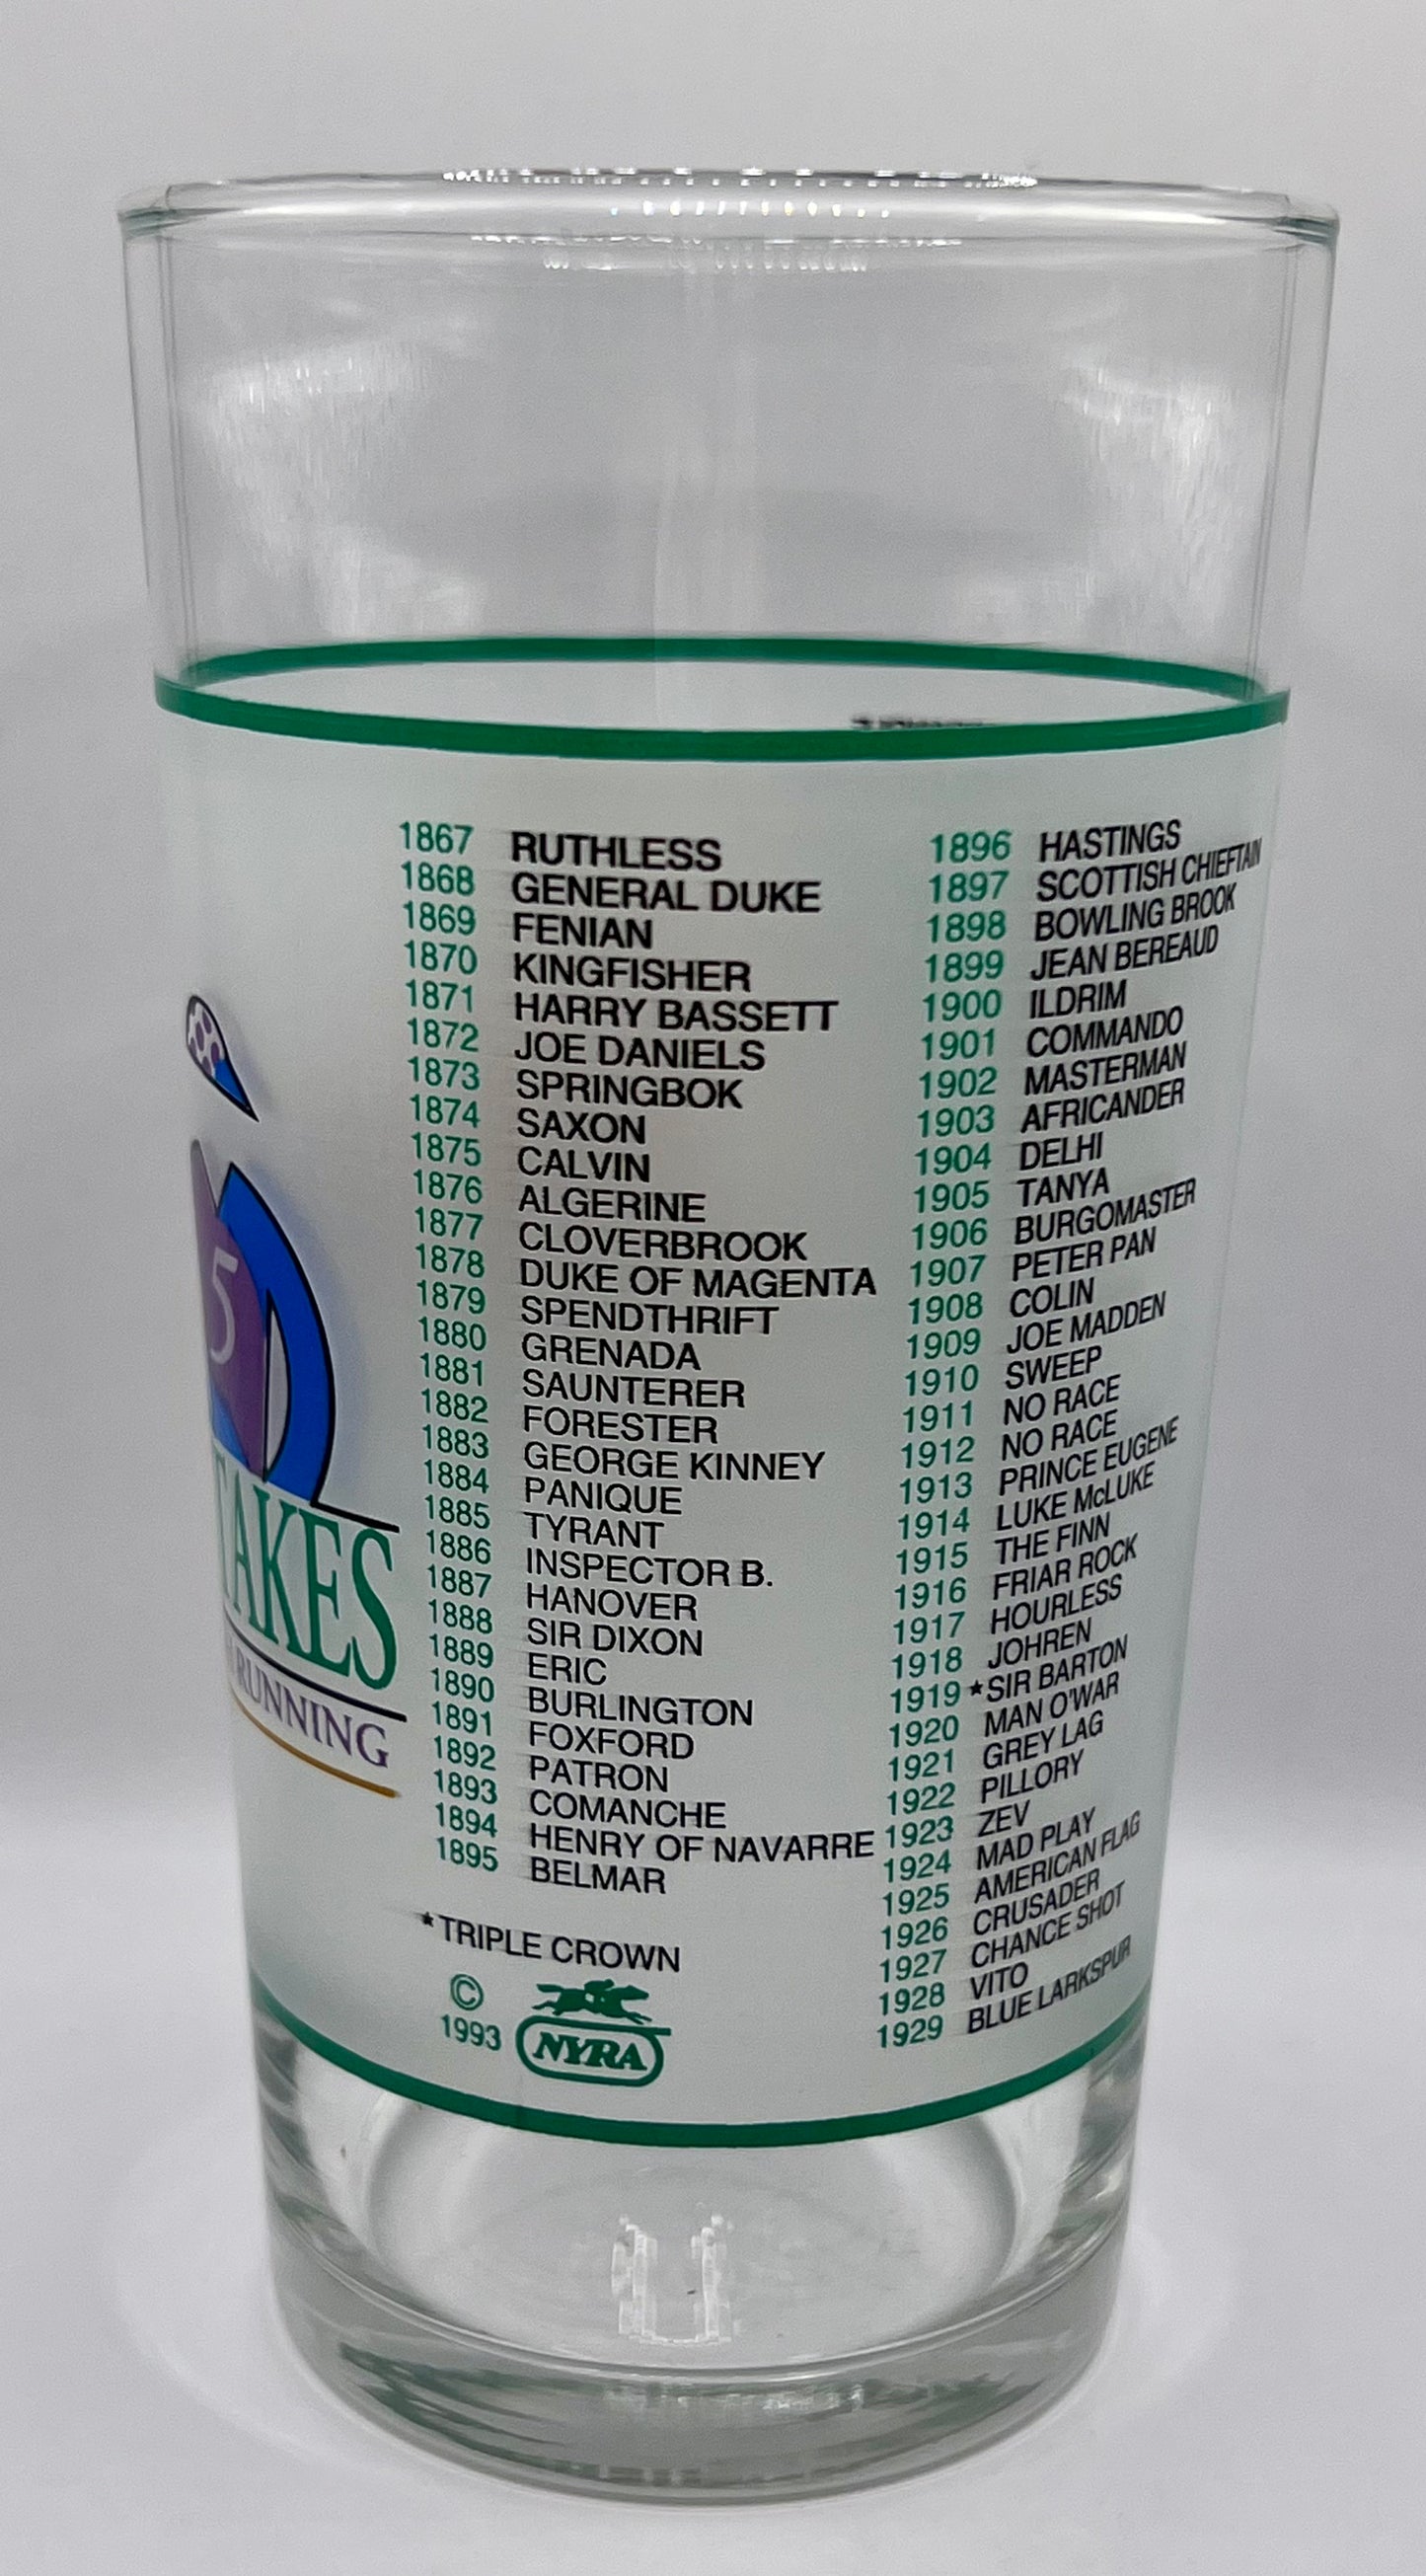 1993 Belmont Stakes Glass